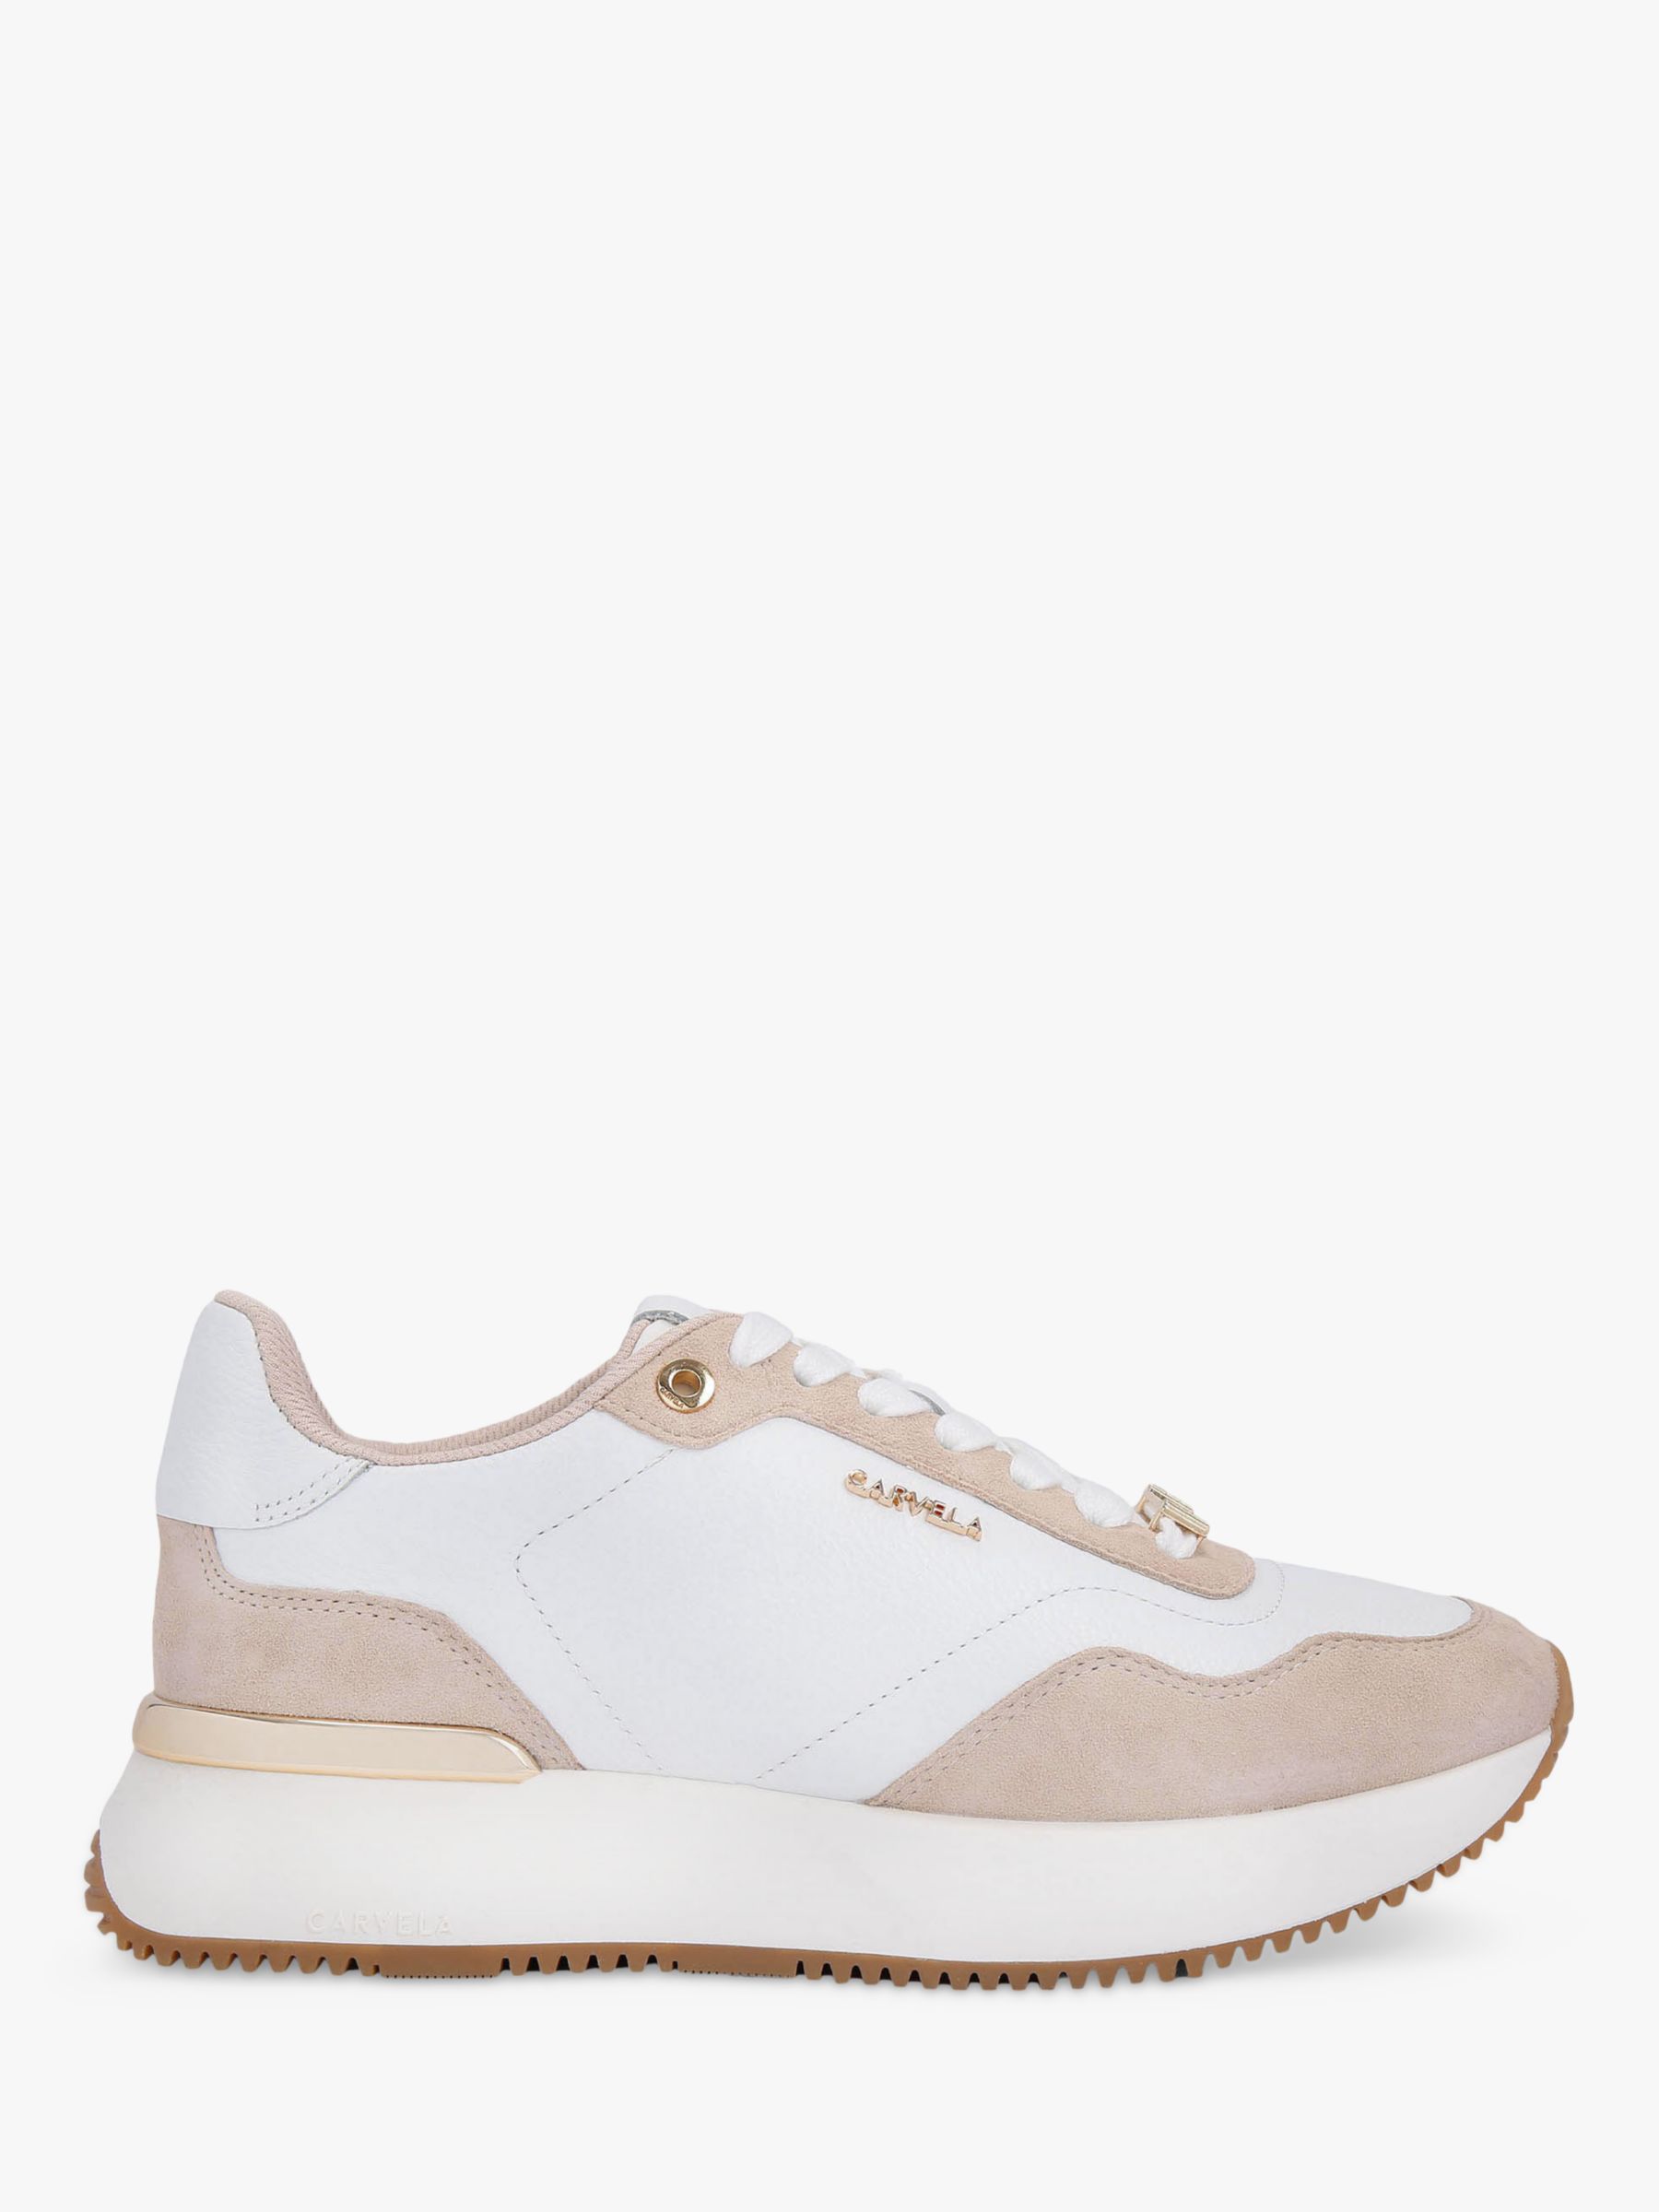 Carvela Flare Leather Trainers, White at John Lewis & Partners